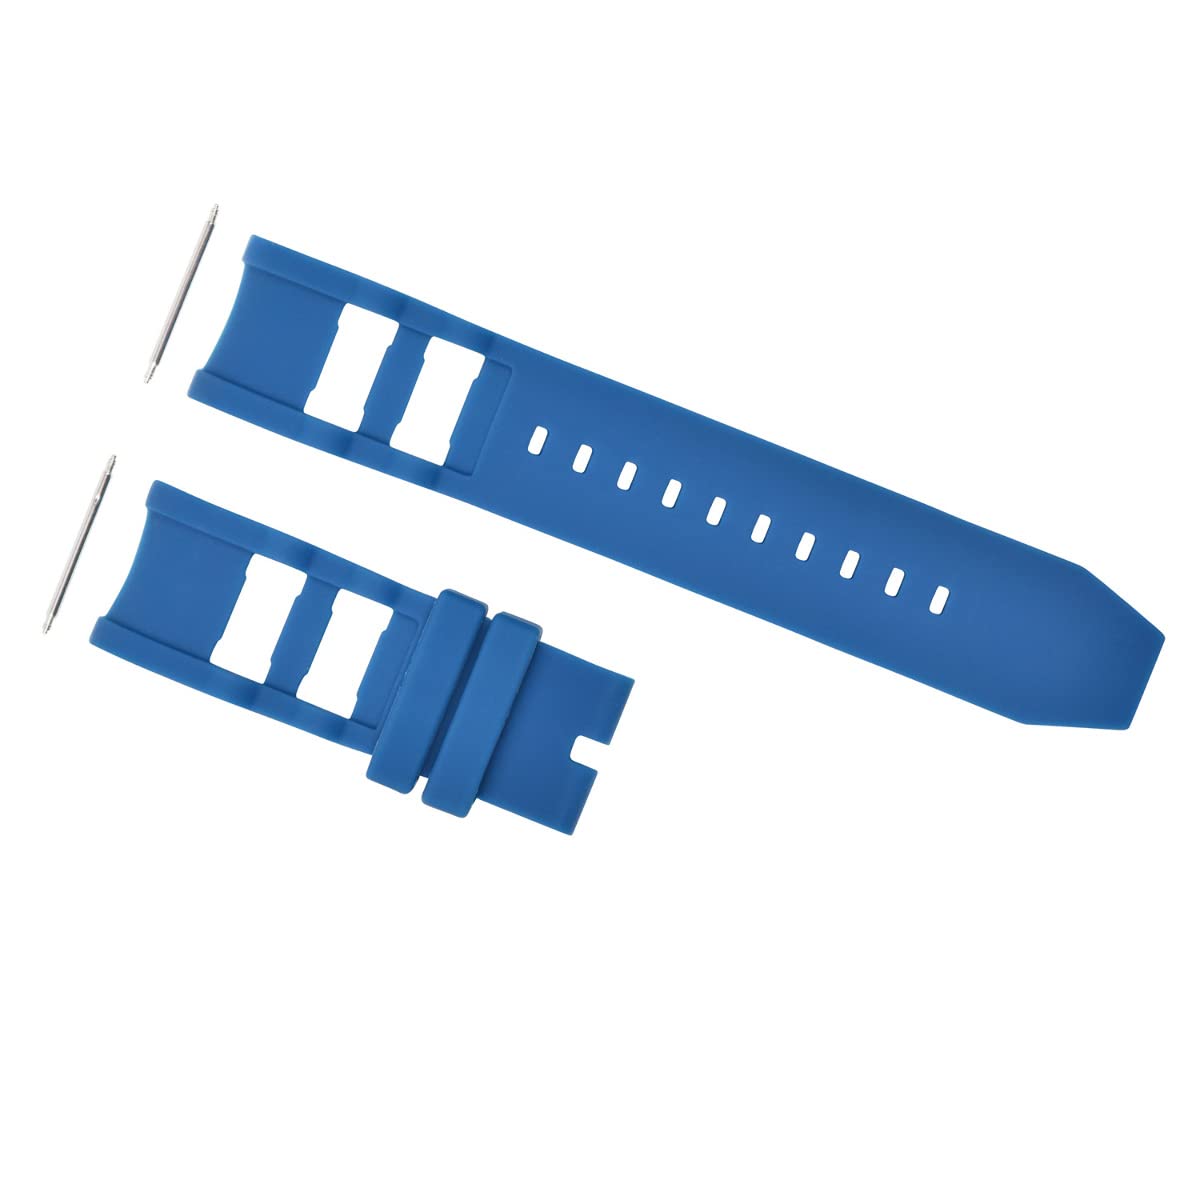 26mm Rubber Watch Strap Compatible with Invicta Russian Diver 1196 1800 1959 11880 Blue